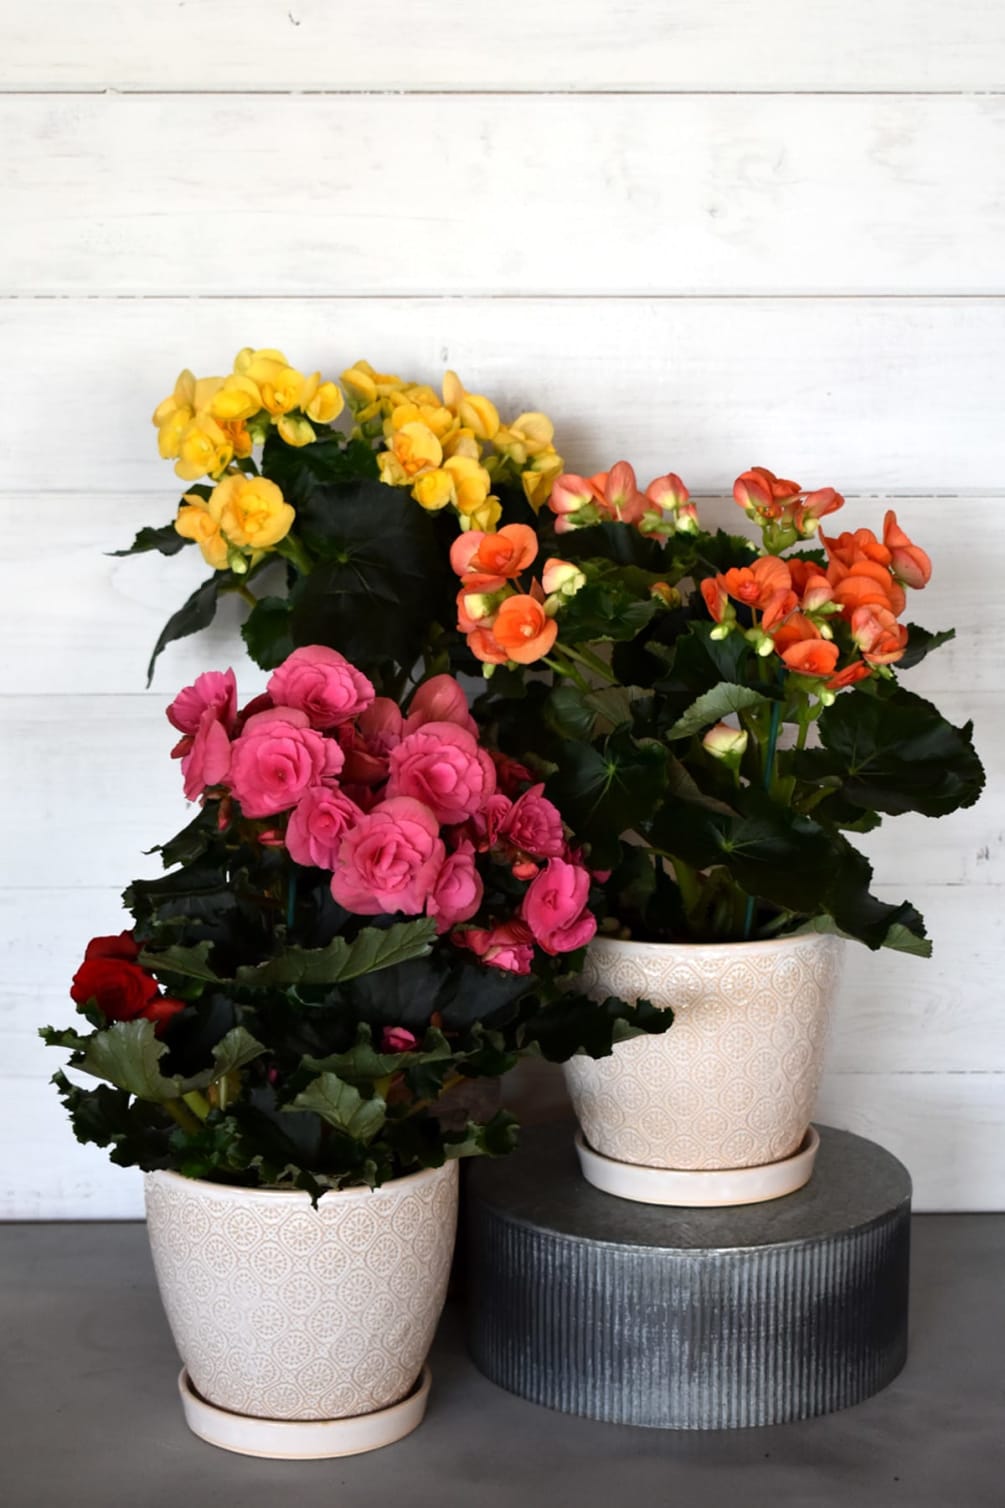 This option allows you to purchase a beautiful blooming begonia plant in